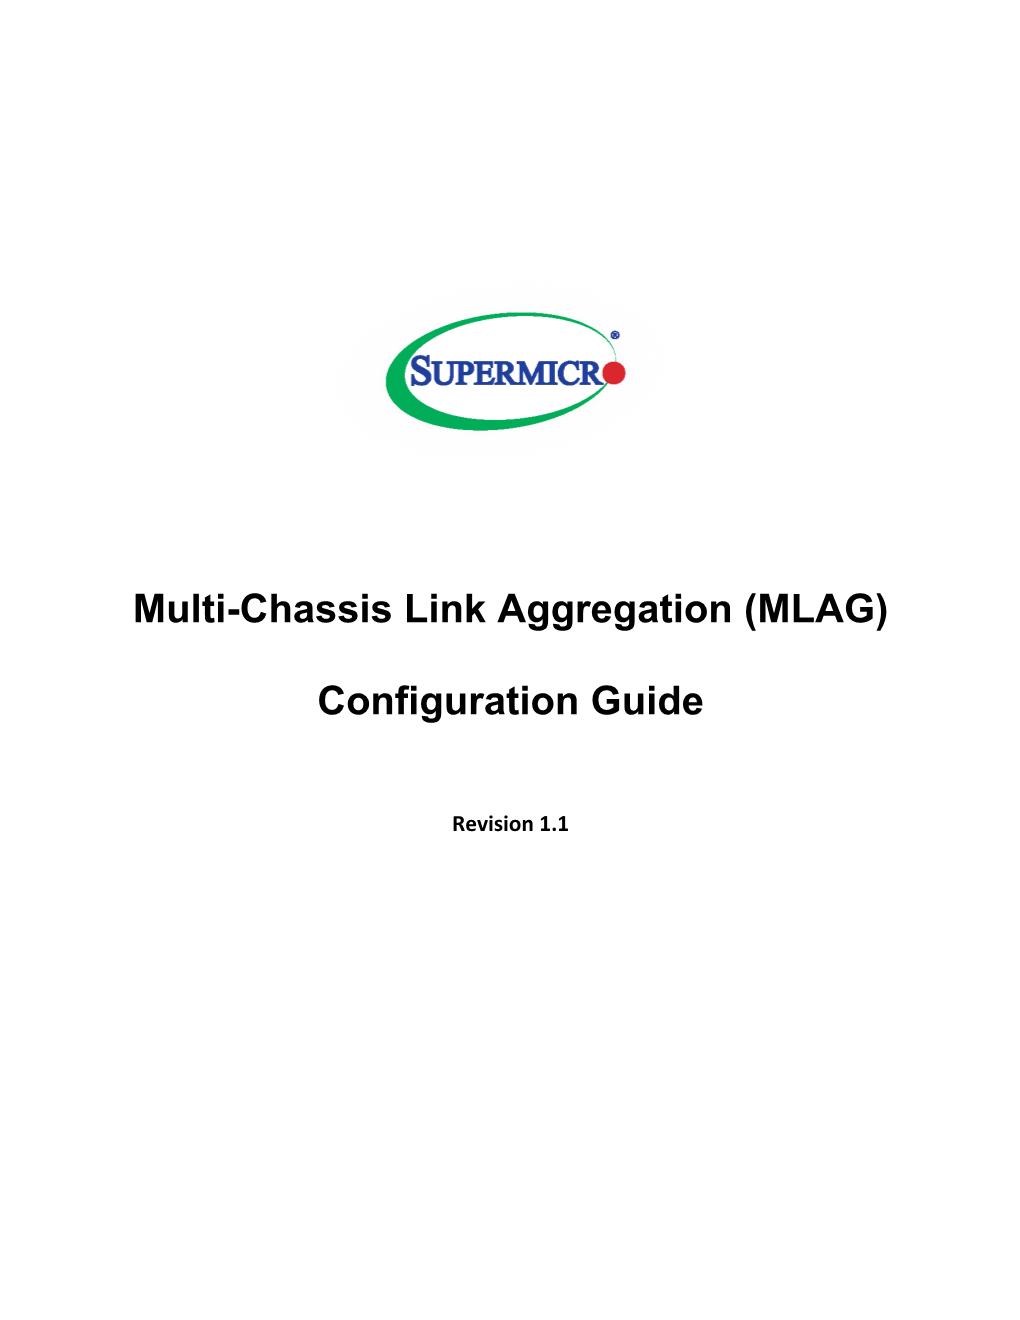 Multi-Chassis Link Aggregation (MLAG) Configuration Guide